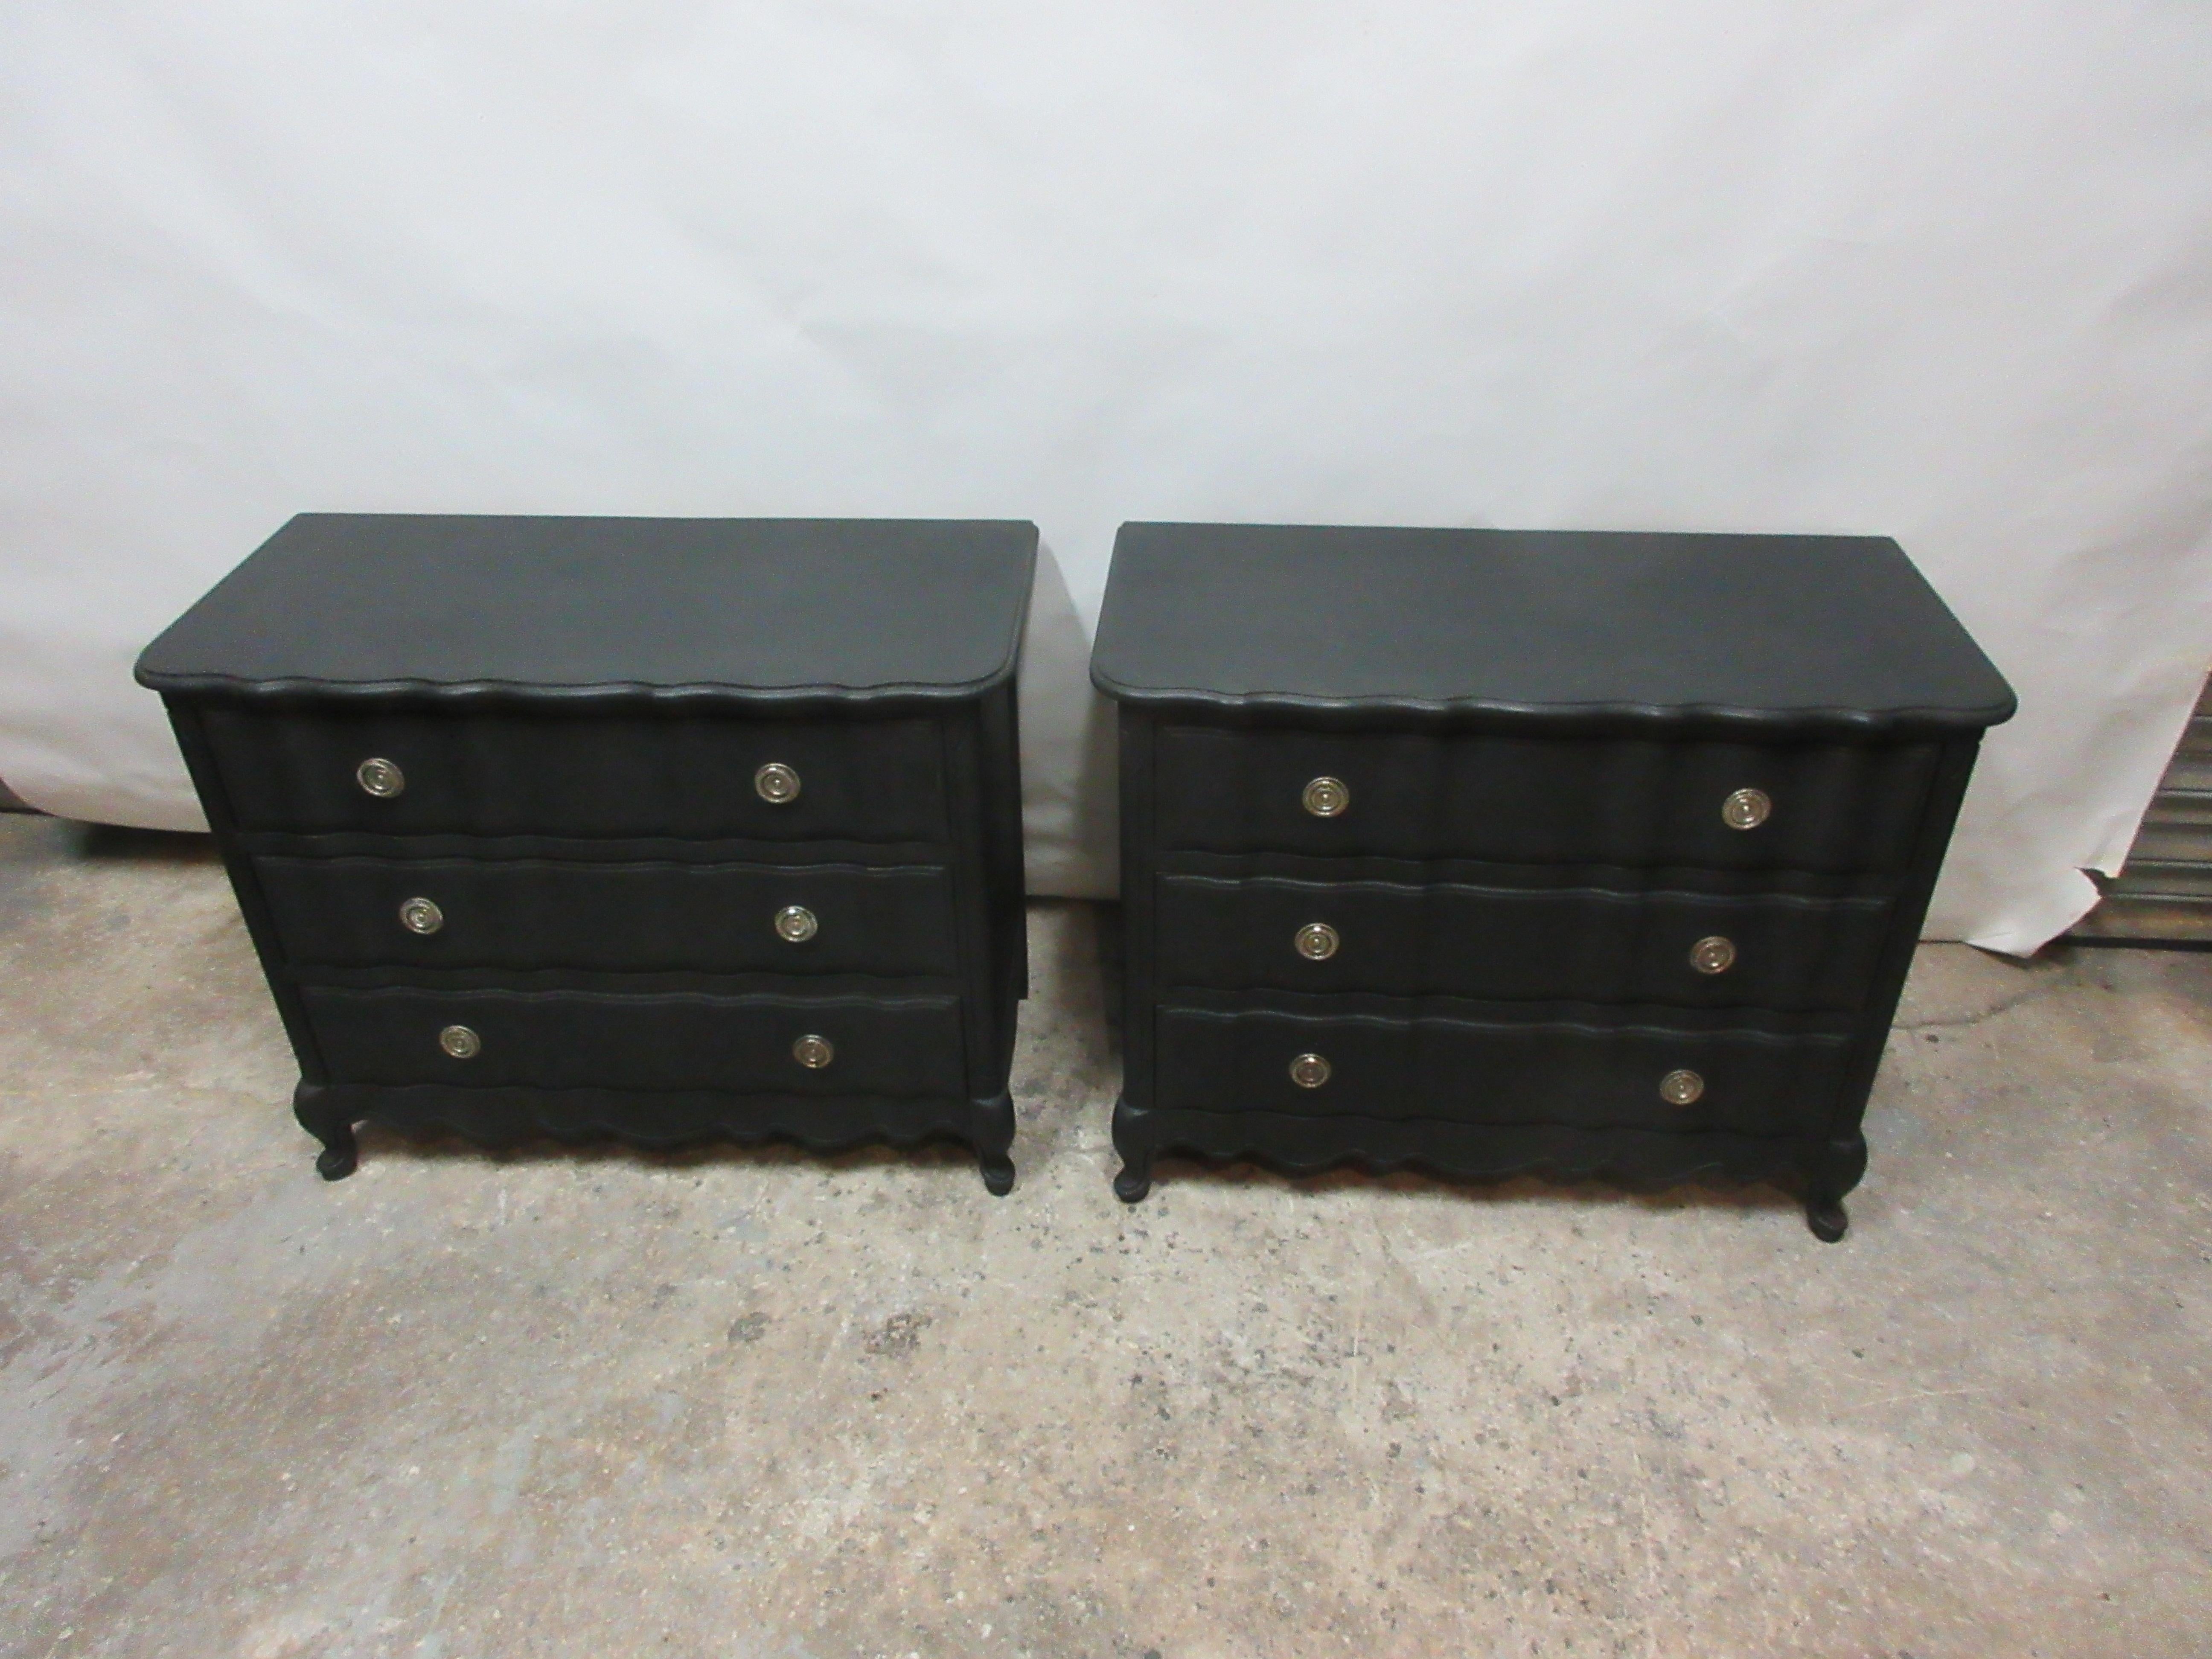 This is a set of 2 Rococo style 3 drawer chest. They have been restored and repainted with milk paints 